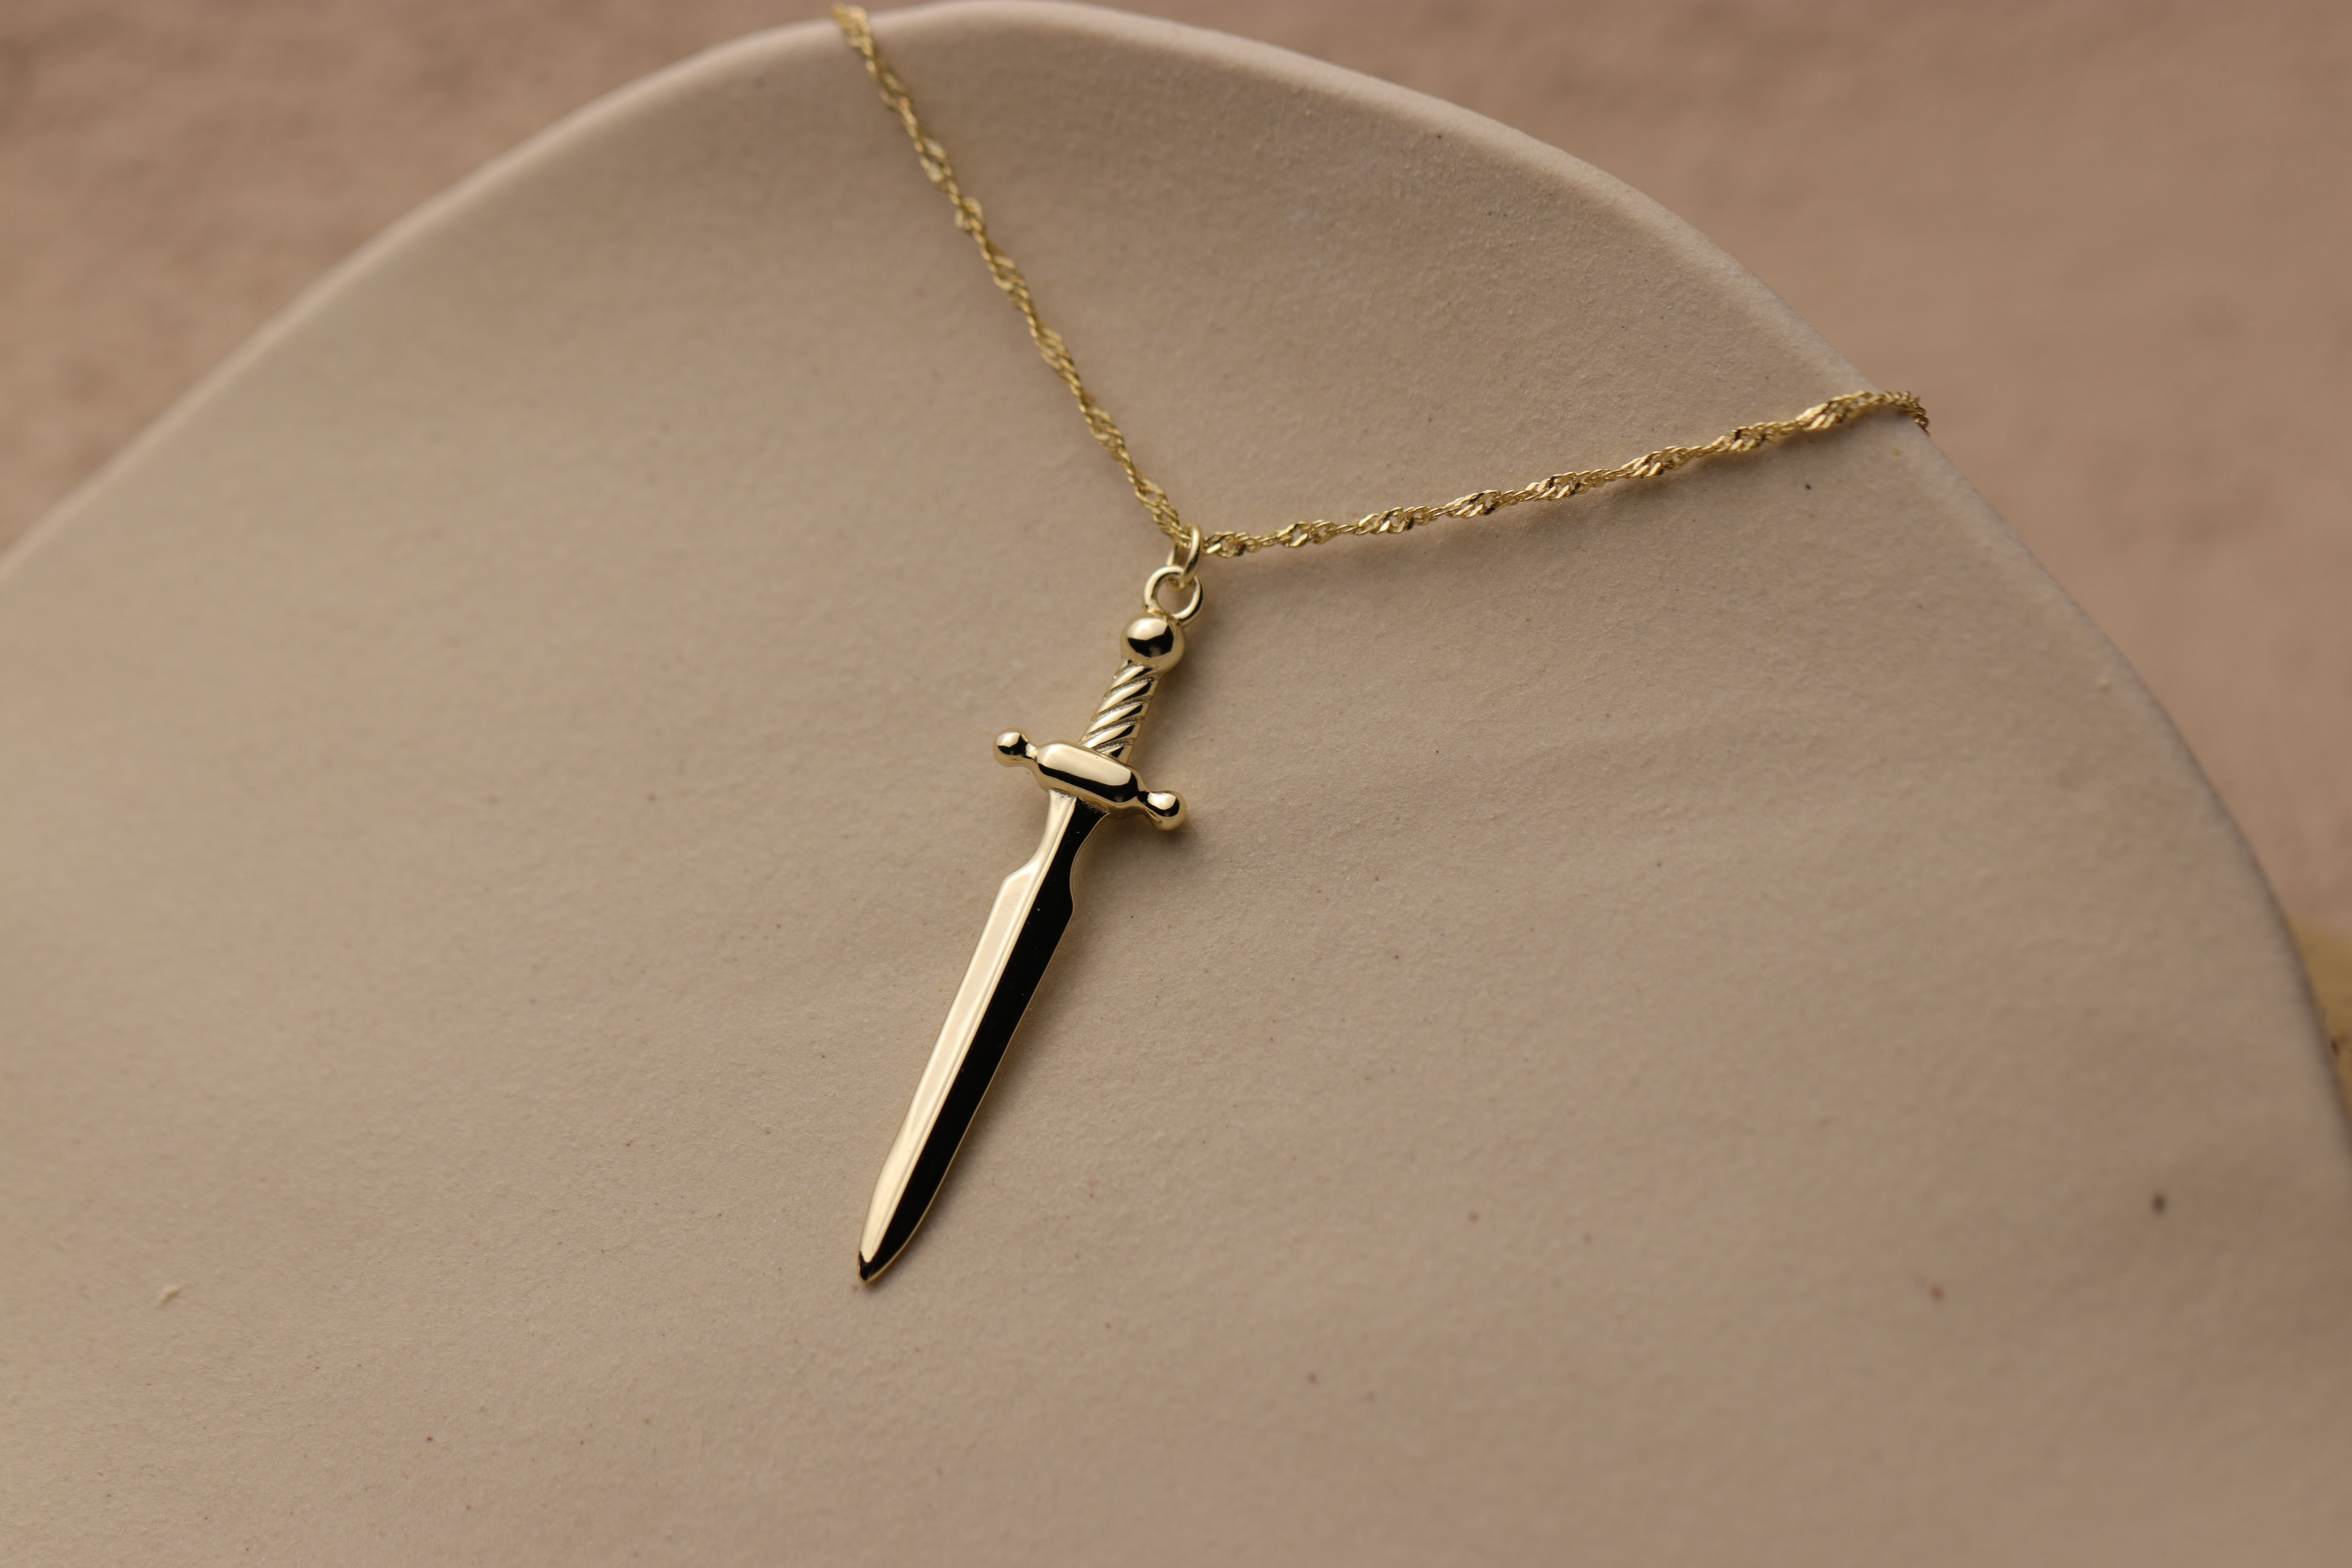 Buy Gold Dagger Charm Necklace Online in India - Etsy